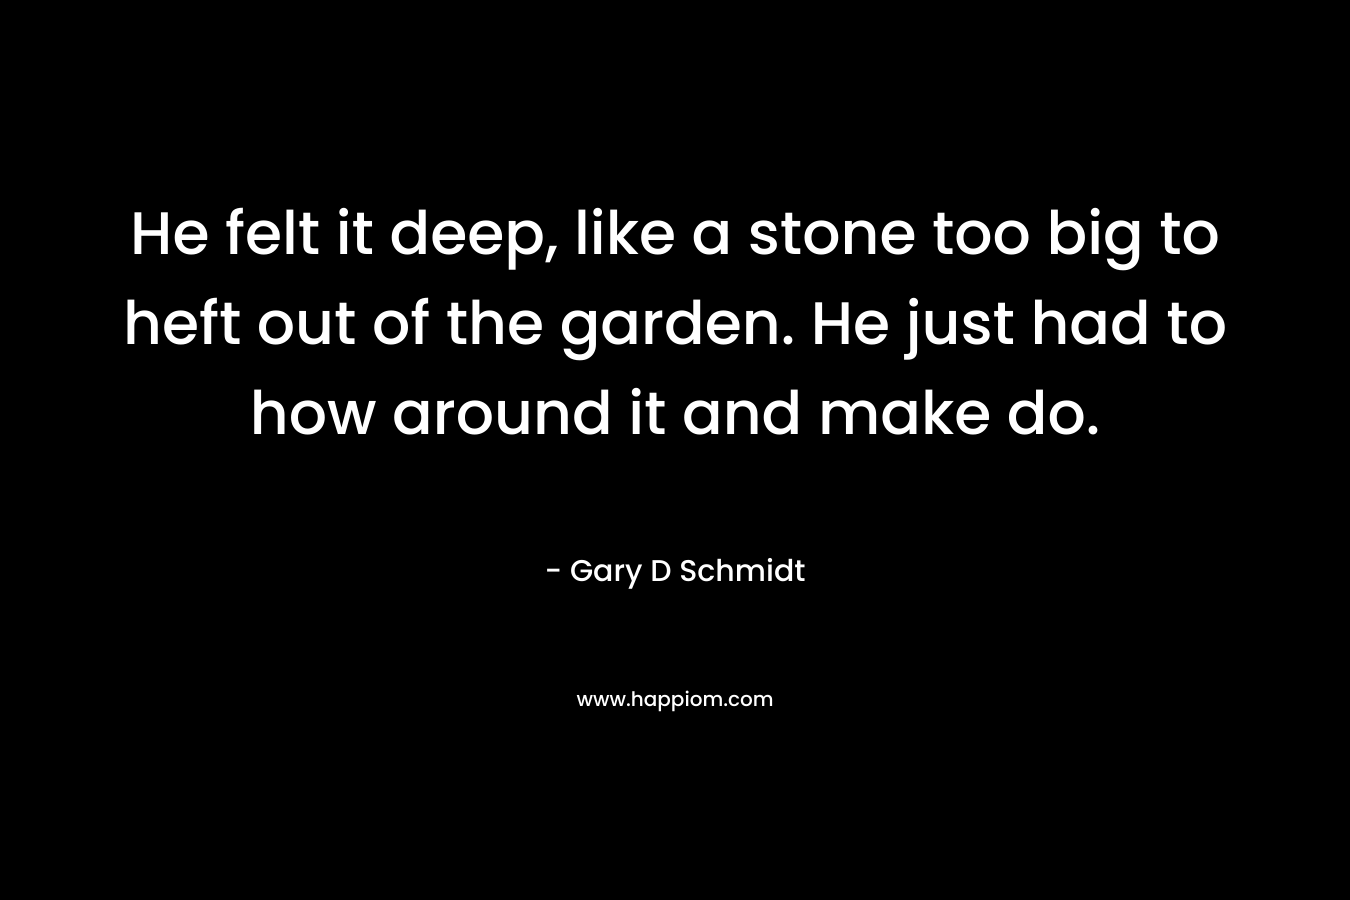 He felt it deep, like a stone too big to heft out of the garden. He just had to how around it and make do. – Gary D Schmidt